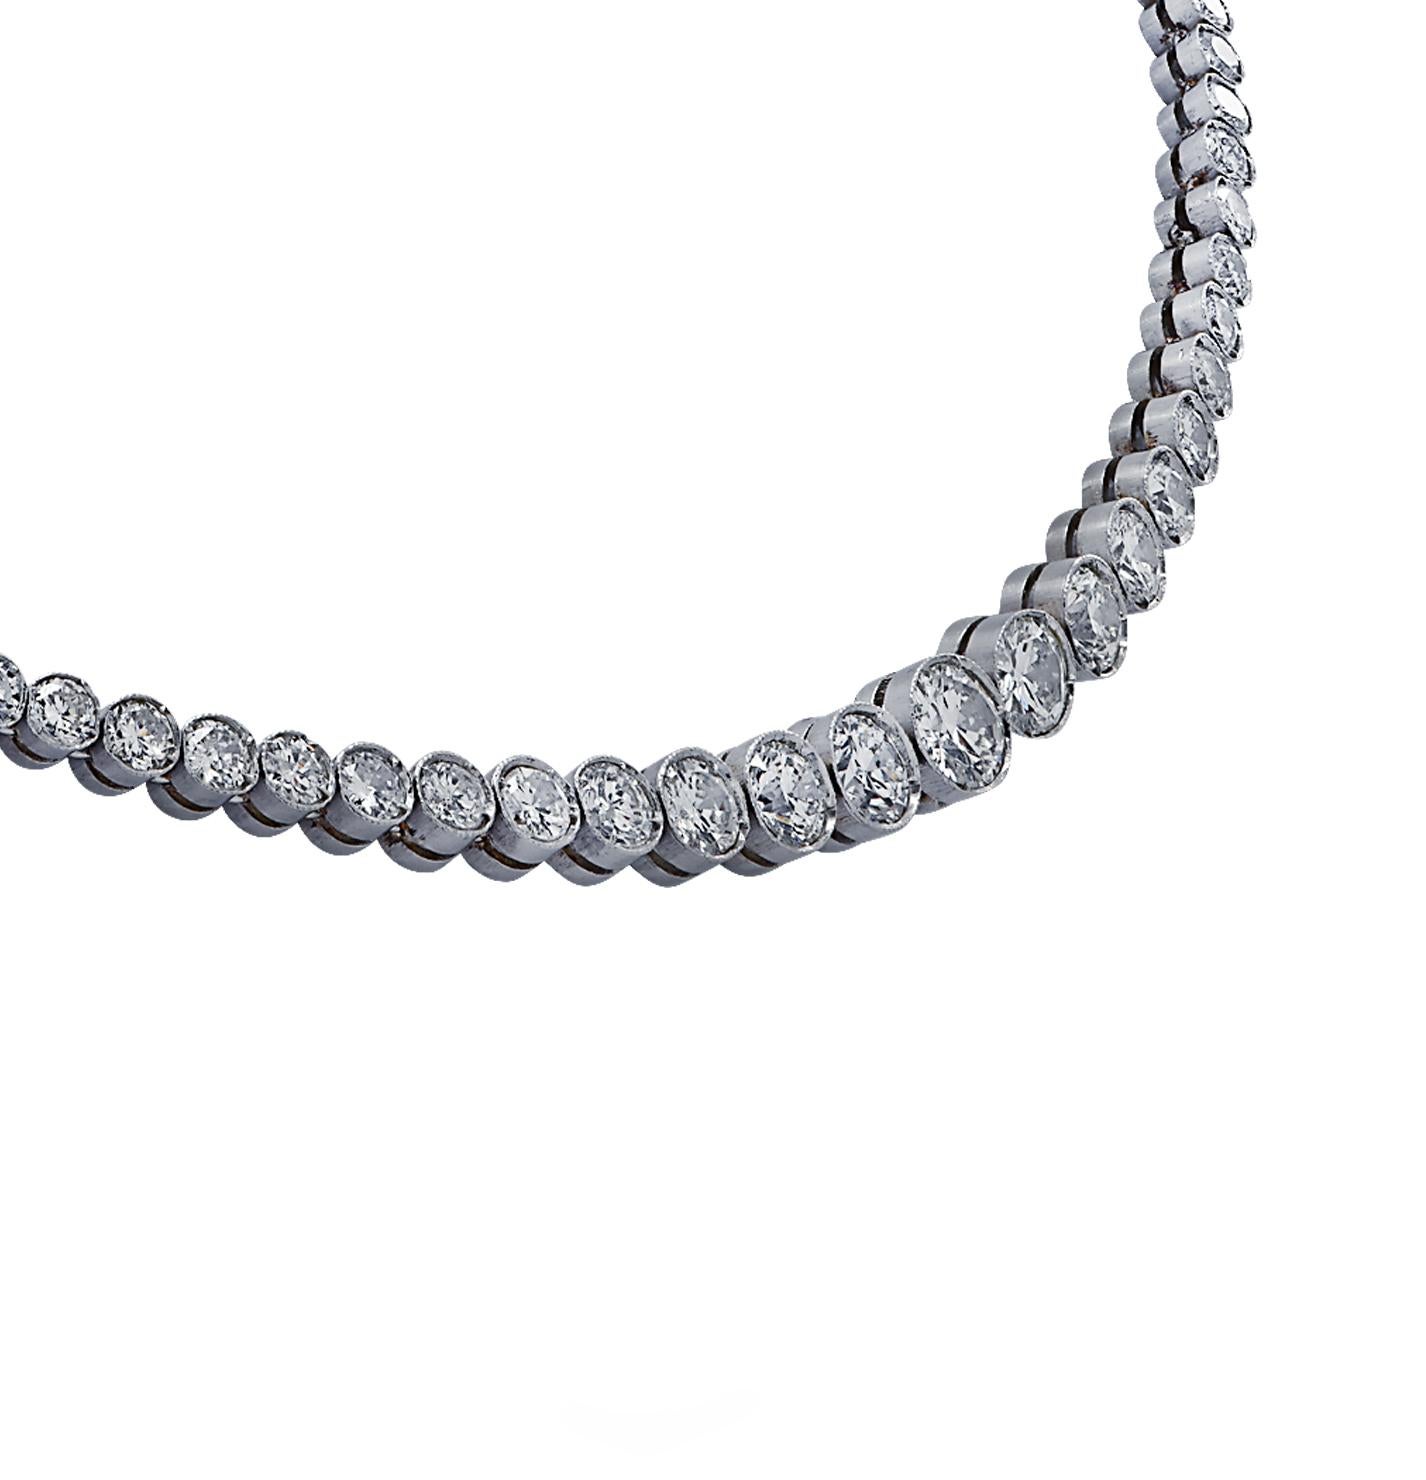 Exquisite diamond riviere necklace Circa 1940 crafted in platinum, showcasing approximately 10 carats of old European cut & transitional cut Diamonds, G - H color, VS-SI Clarity. The graduating diamonds are set in a seamless sea of eternity,